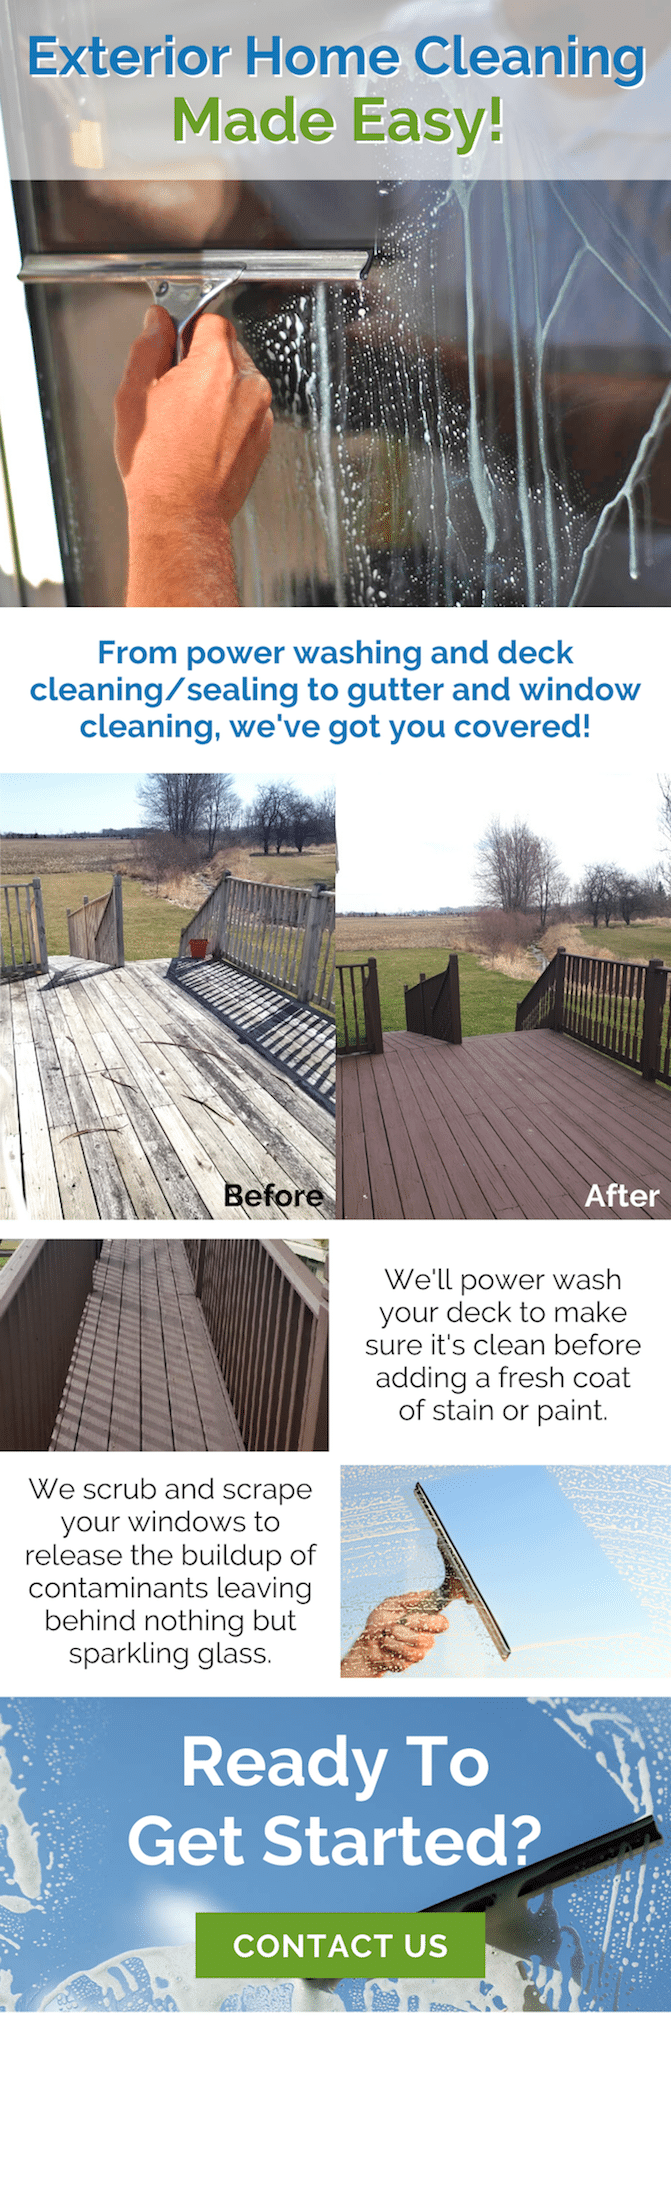 Exterior Home Cleaning Made Easy